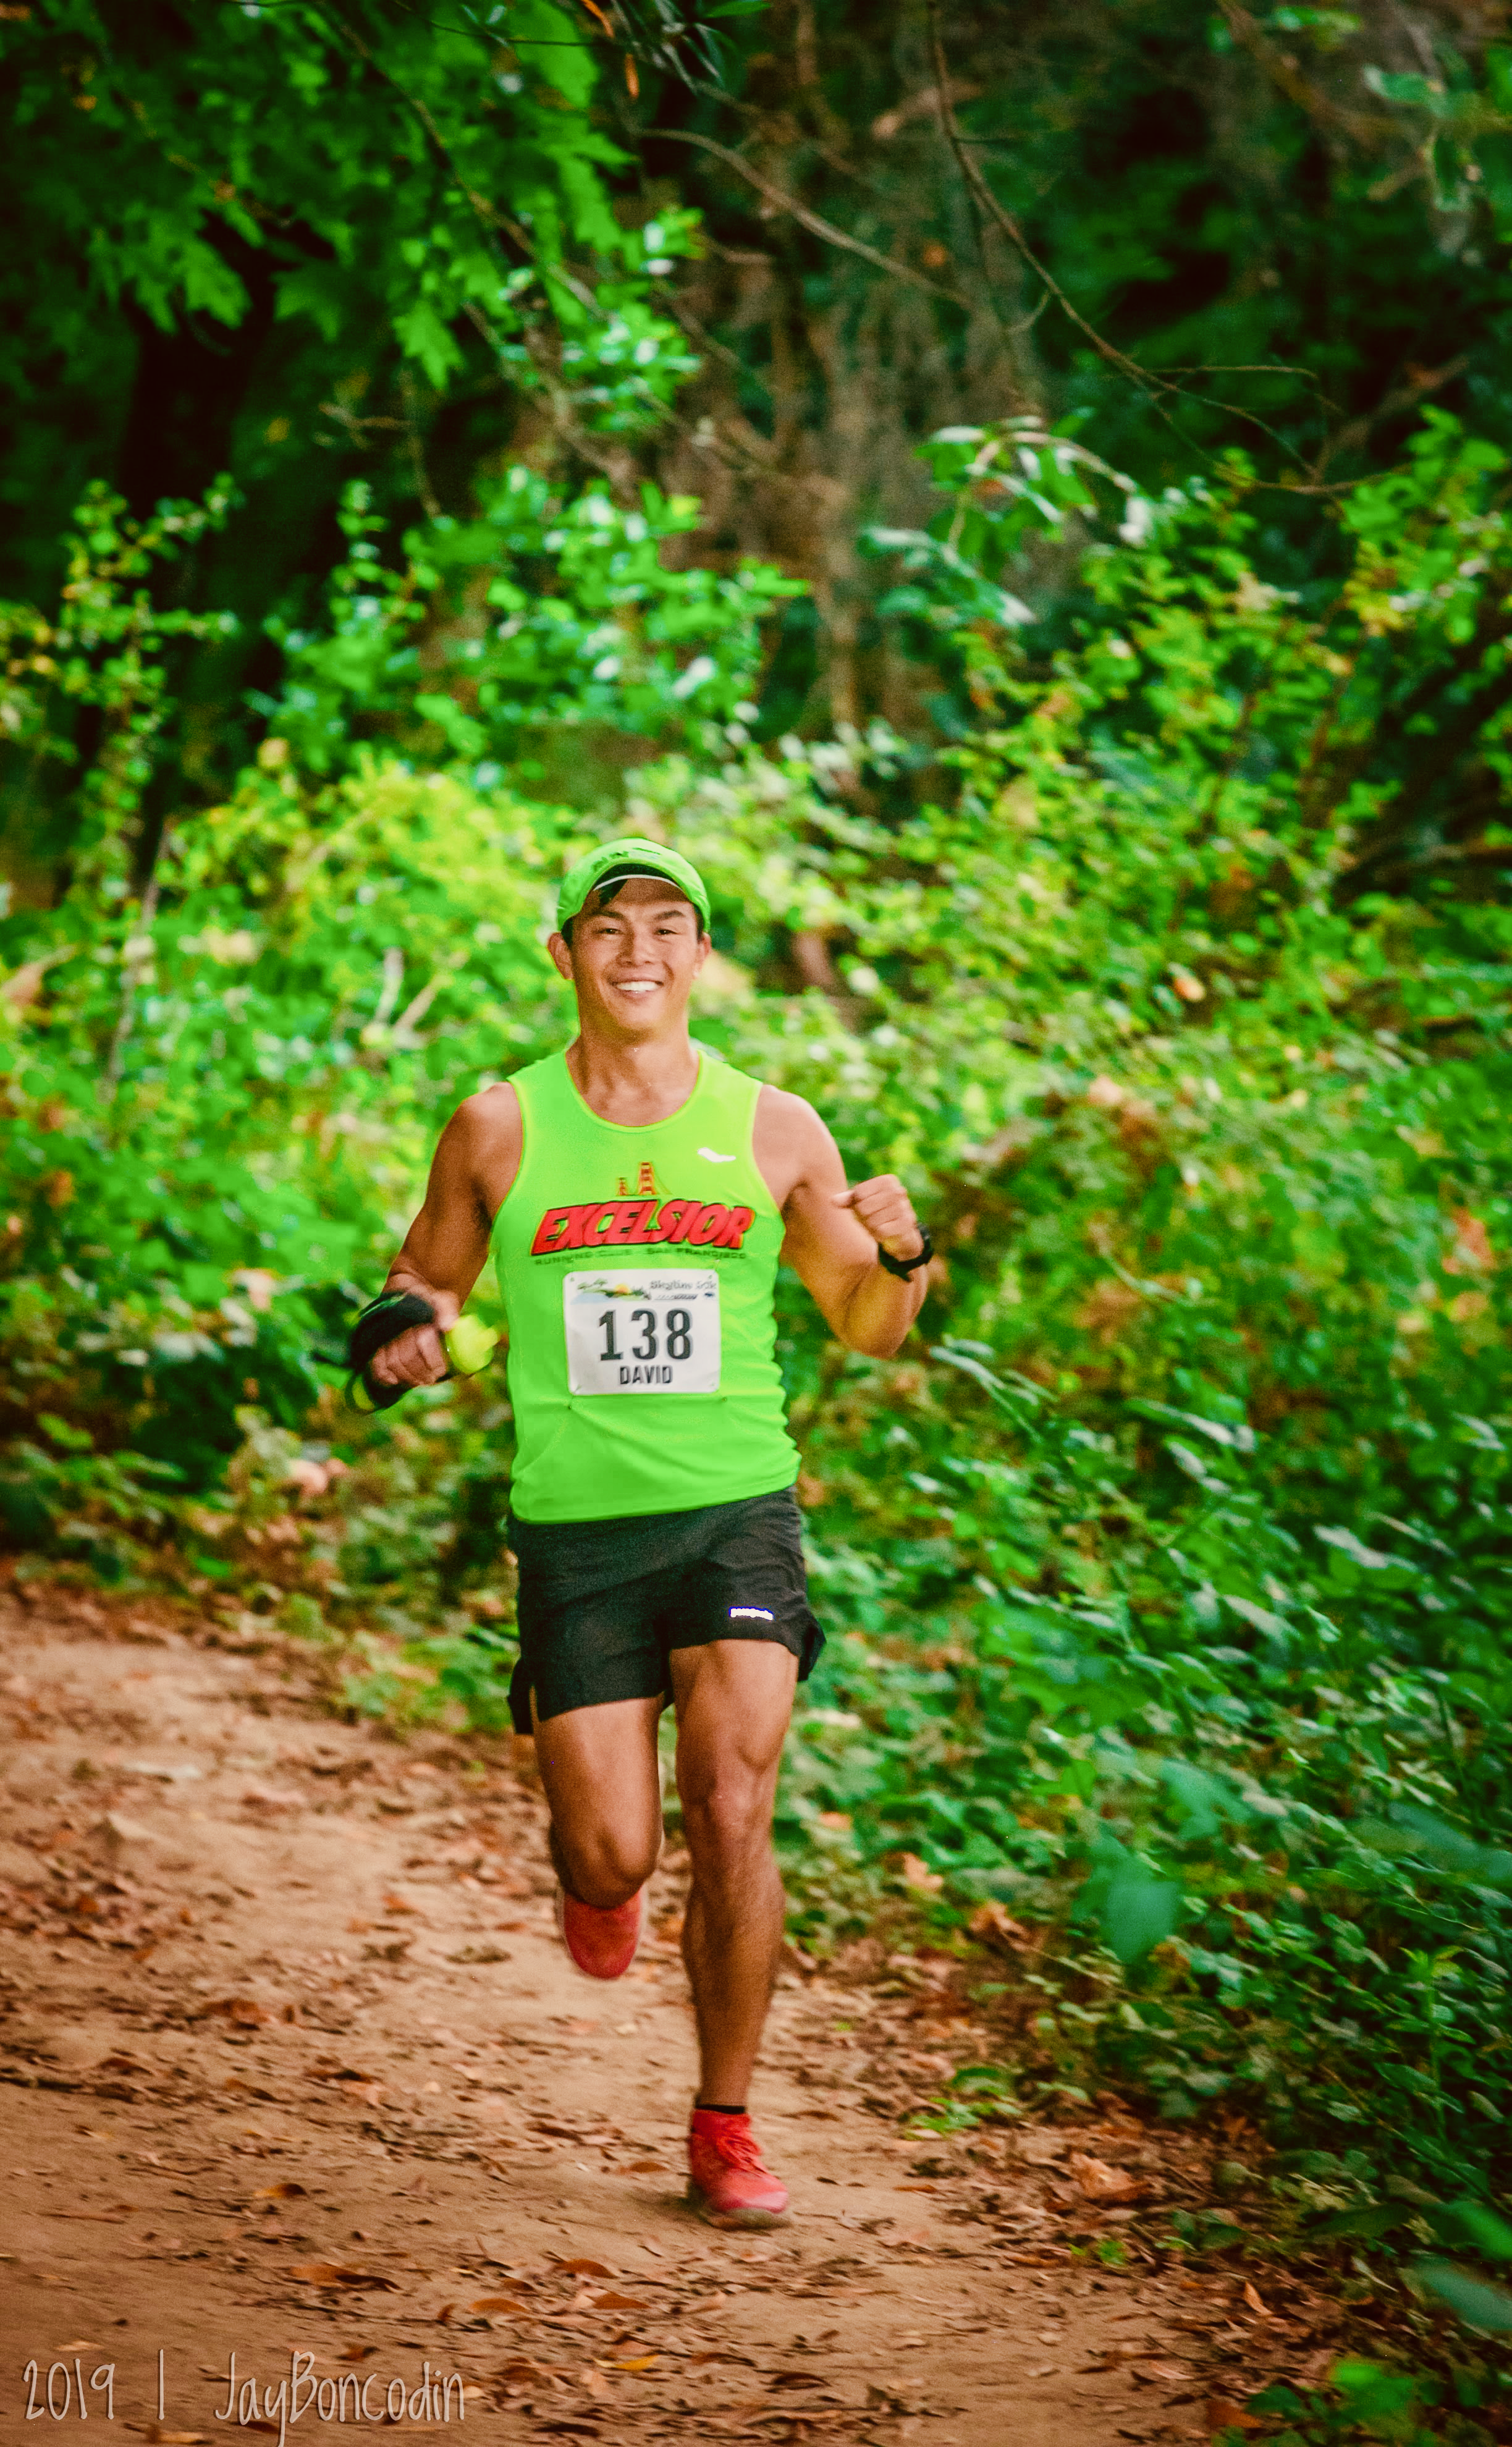 Can't remember exactly where it was taken during Skyline 50K 2019, but it was early enough that my smile still looks somewhat normal